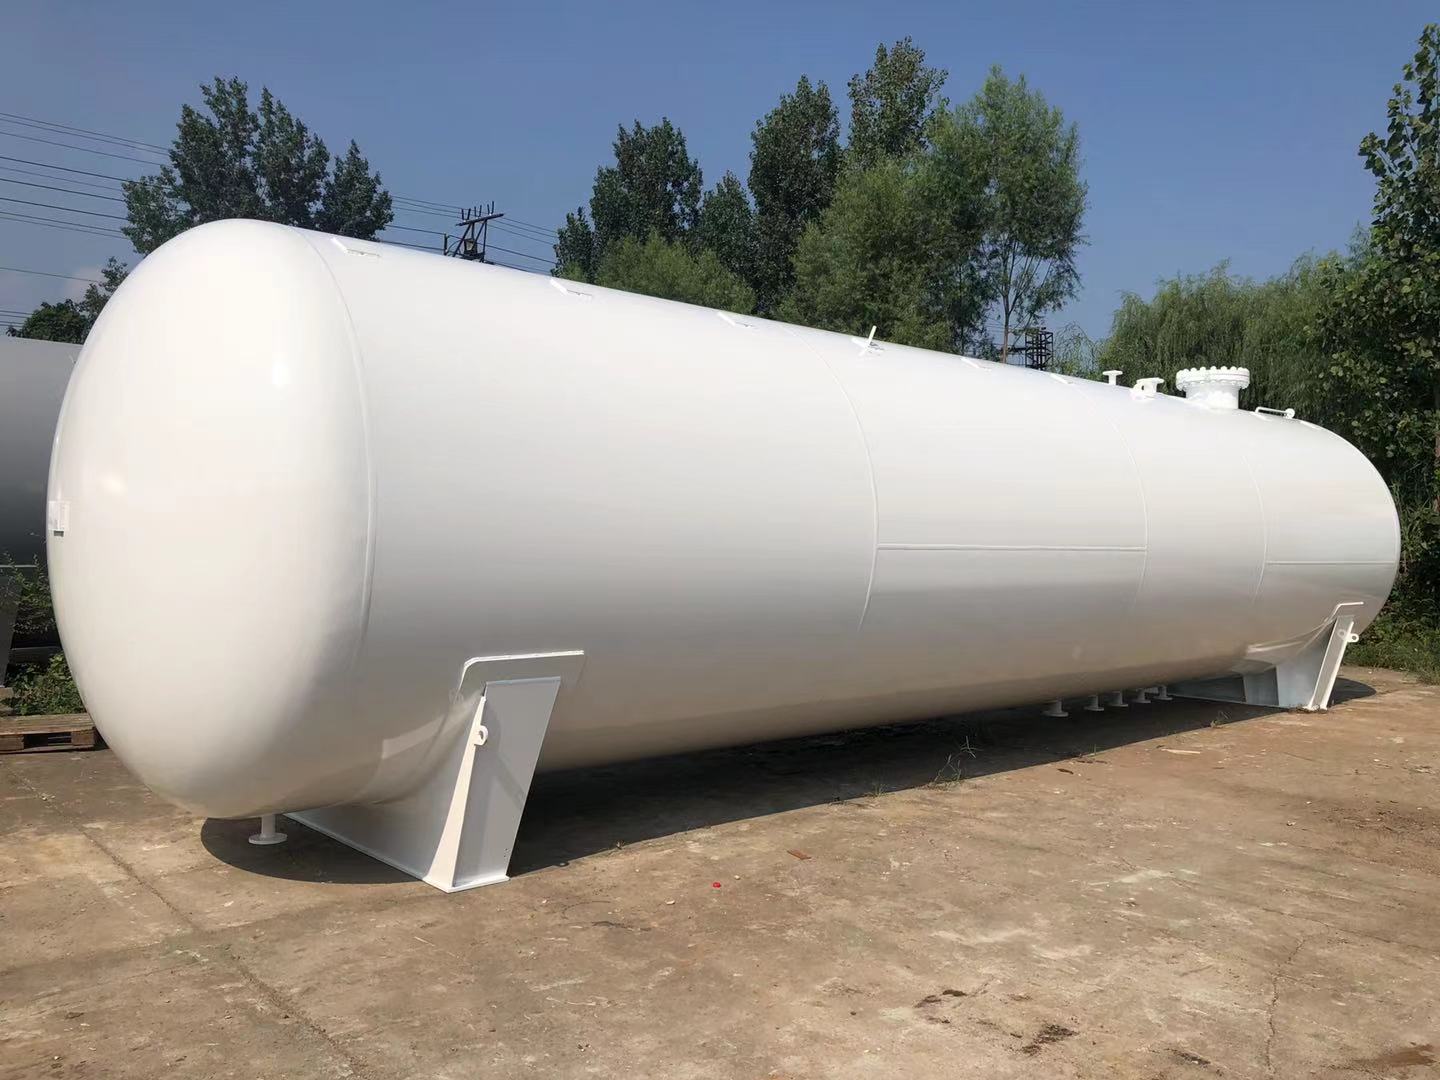 Production specification of liquefied gas storage tank